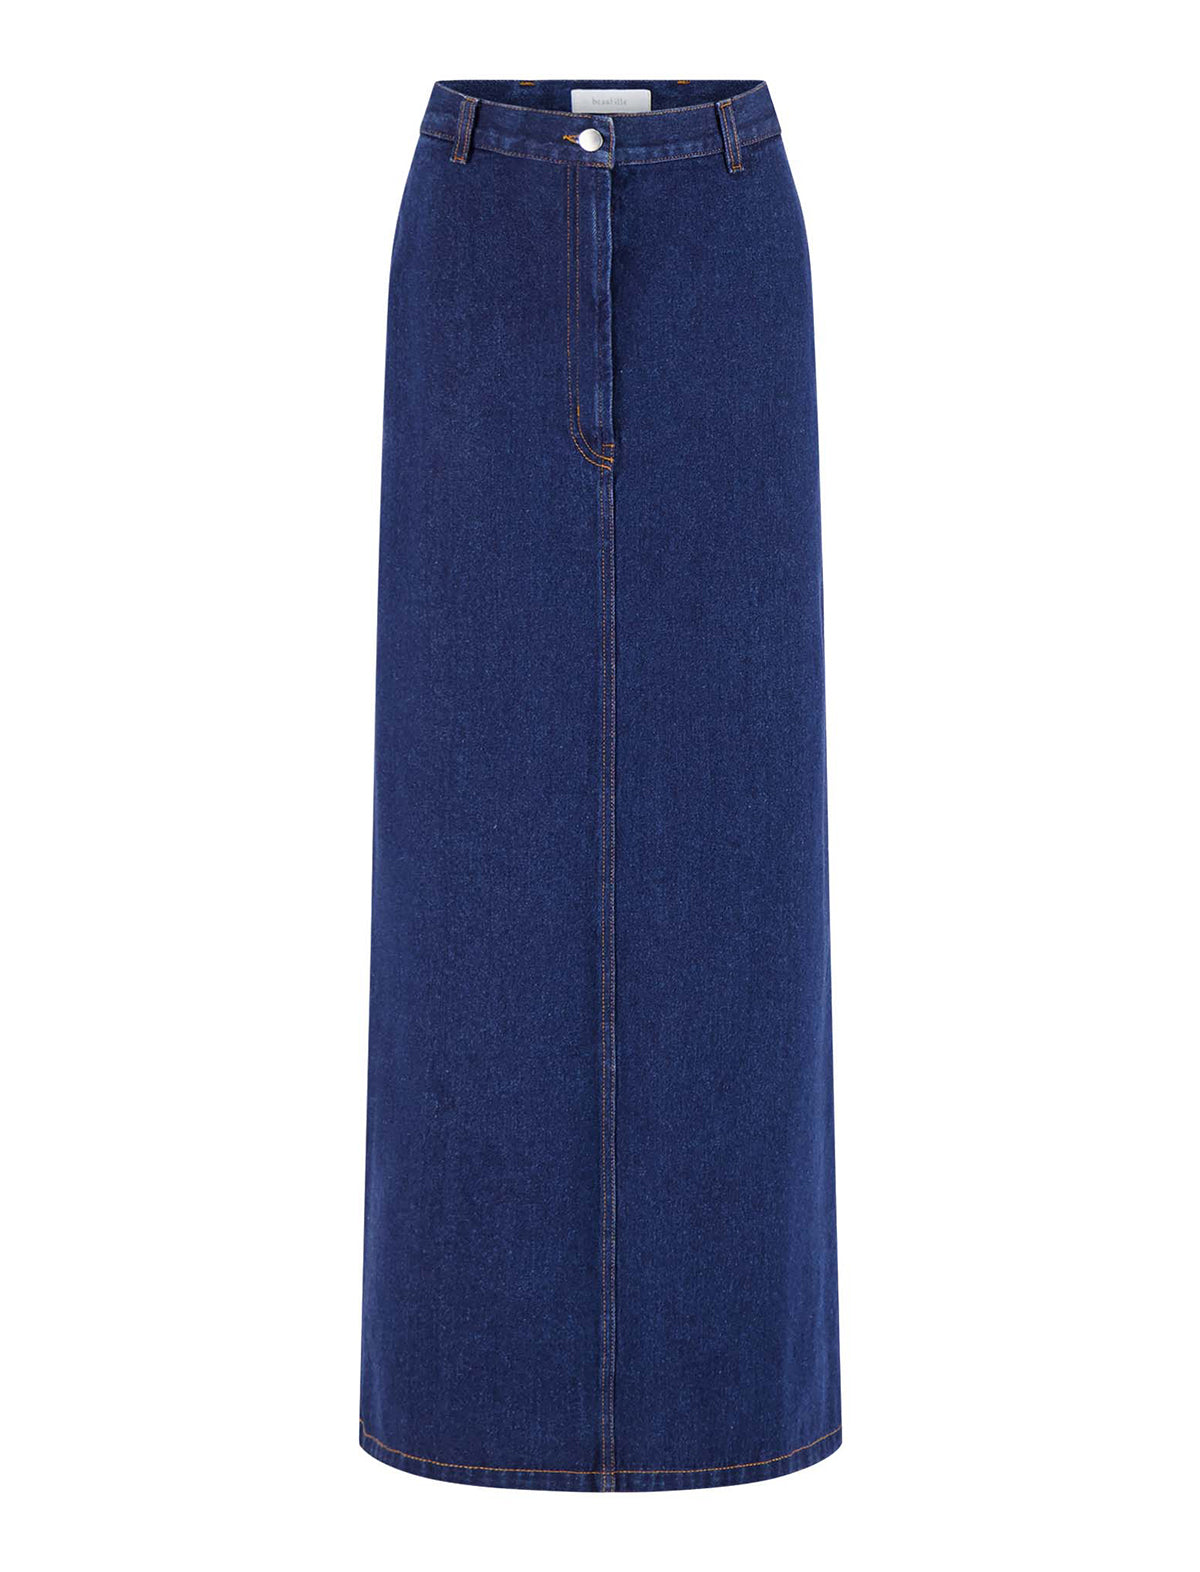 BEAUFILLE Minter Maxi Skirt in Blue Wash